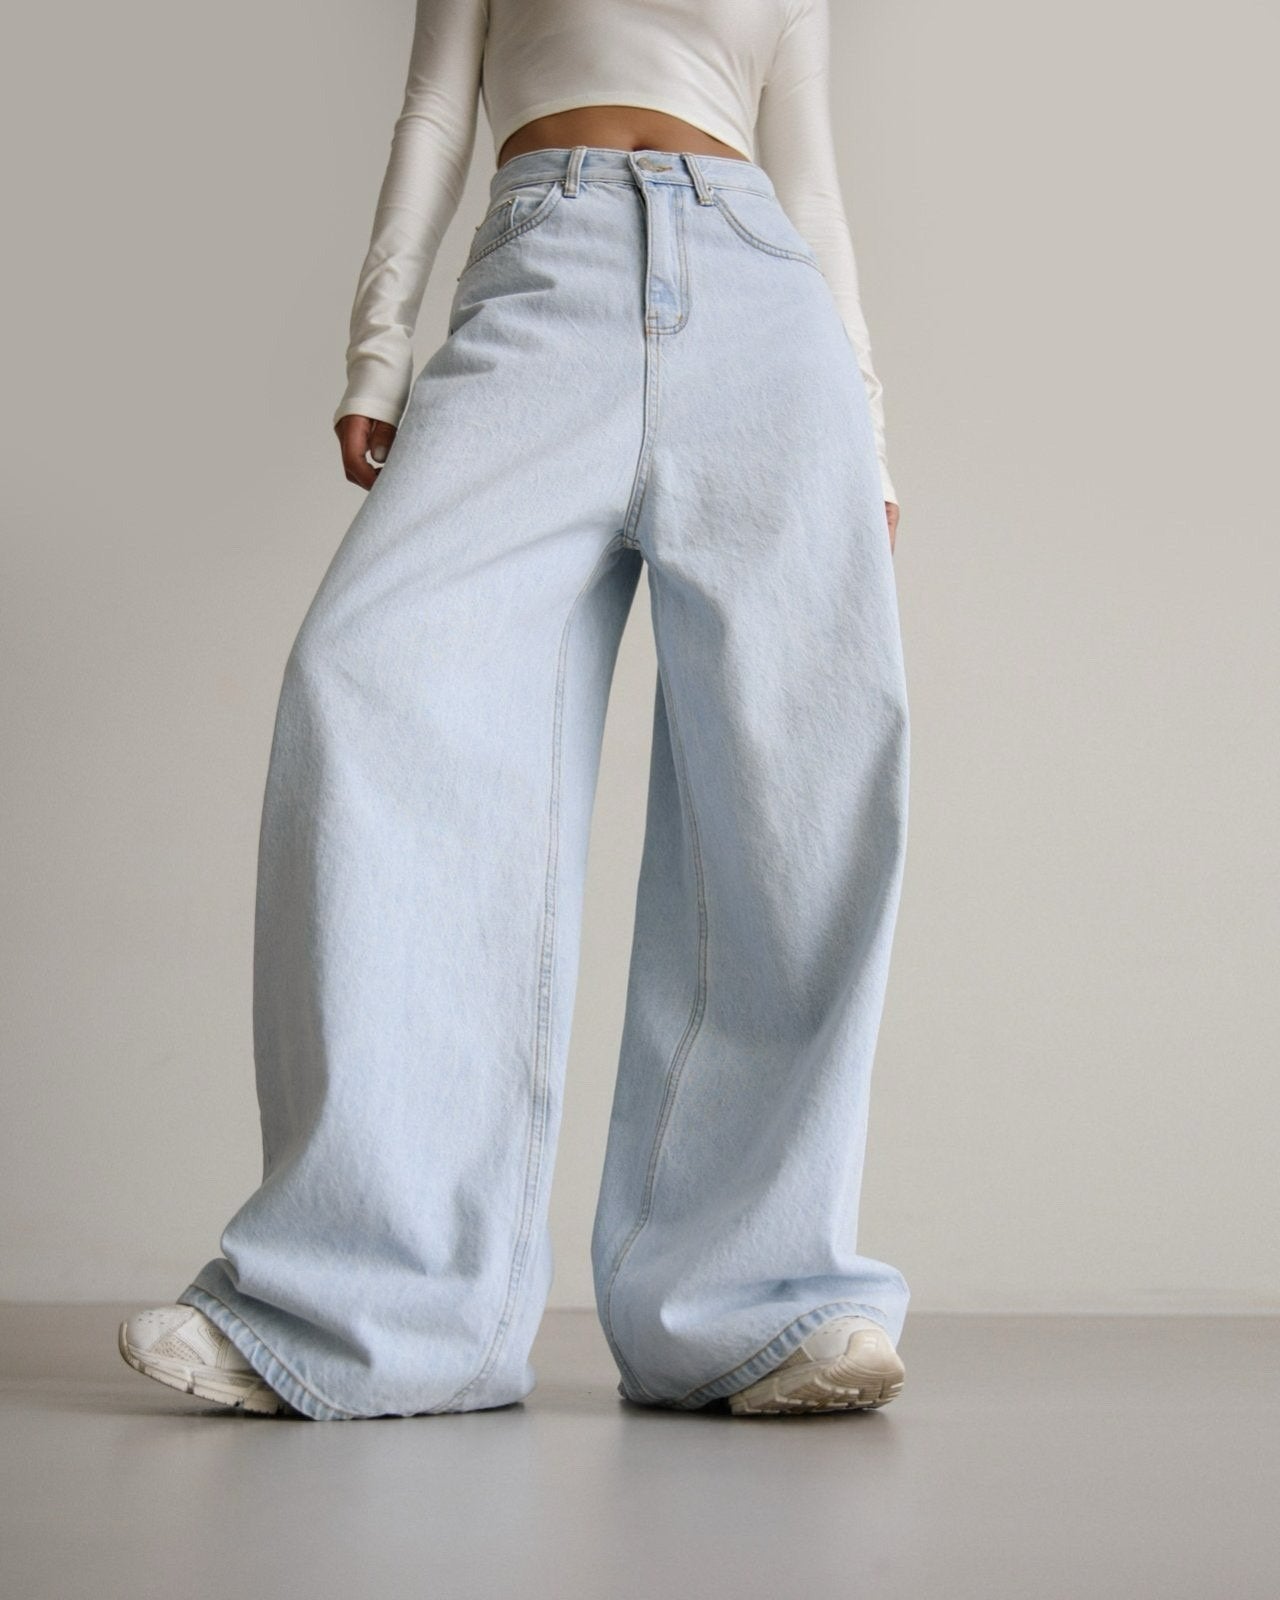 【PAPERMOON 페이퍼 문】SS / Iced Blue Wide Leg Flared Denim Jeans